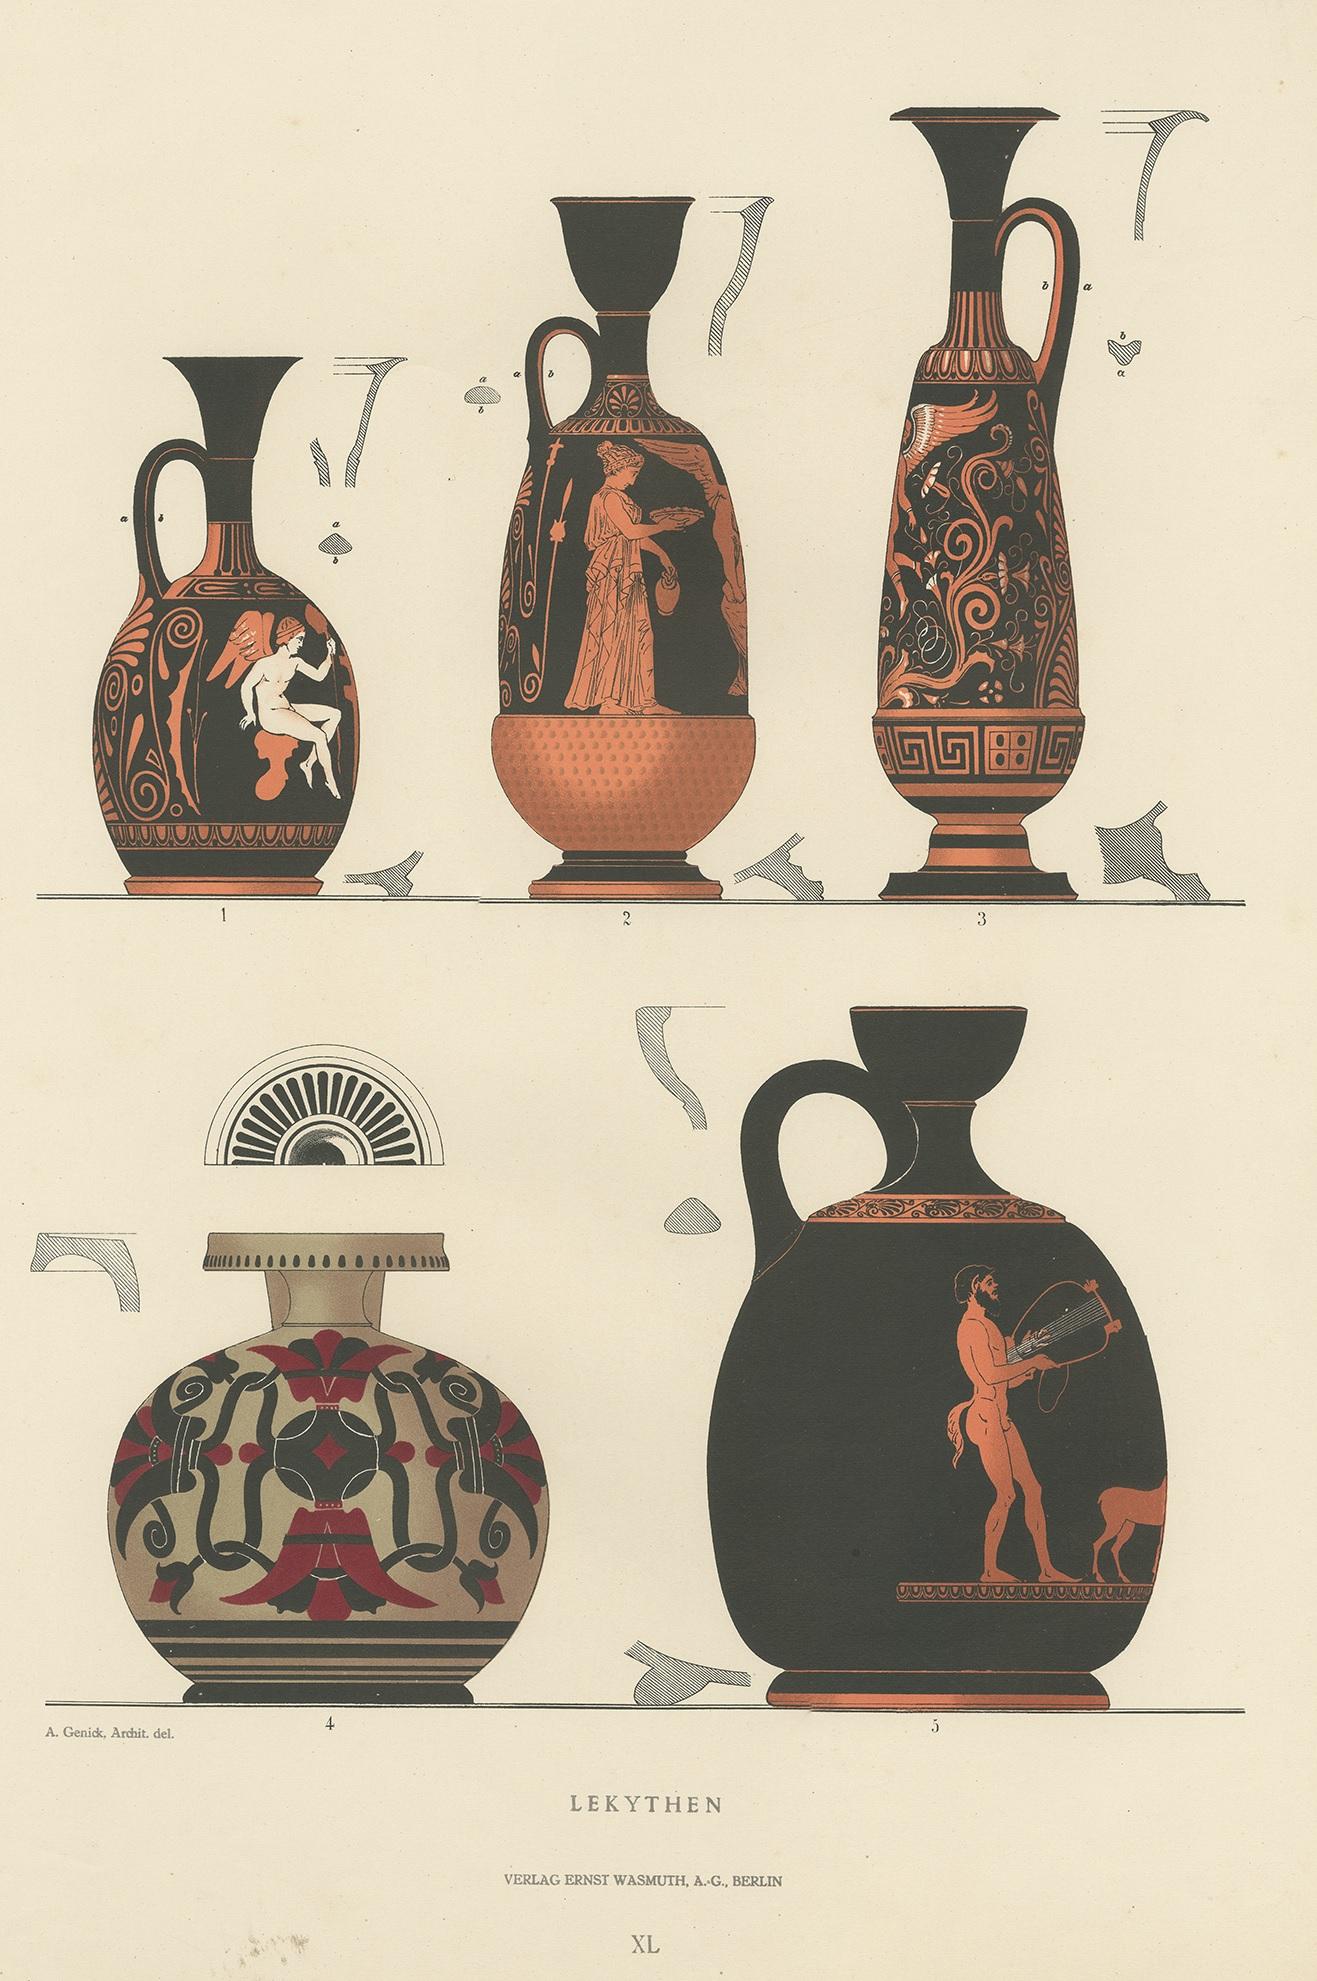 Antique print titled 'Lekythen'. Colour-printed large lithograph by Ernst Wasmuth depicting Greek lekythos. A lekythos (plural lekythoi) is a type of ancient Greek vessel used for storing oil, especially olive oil. This print originates from